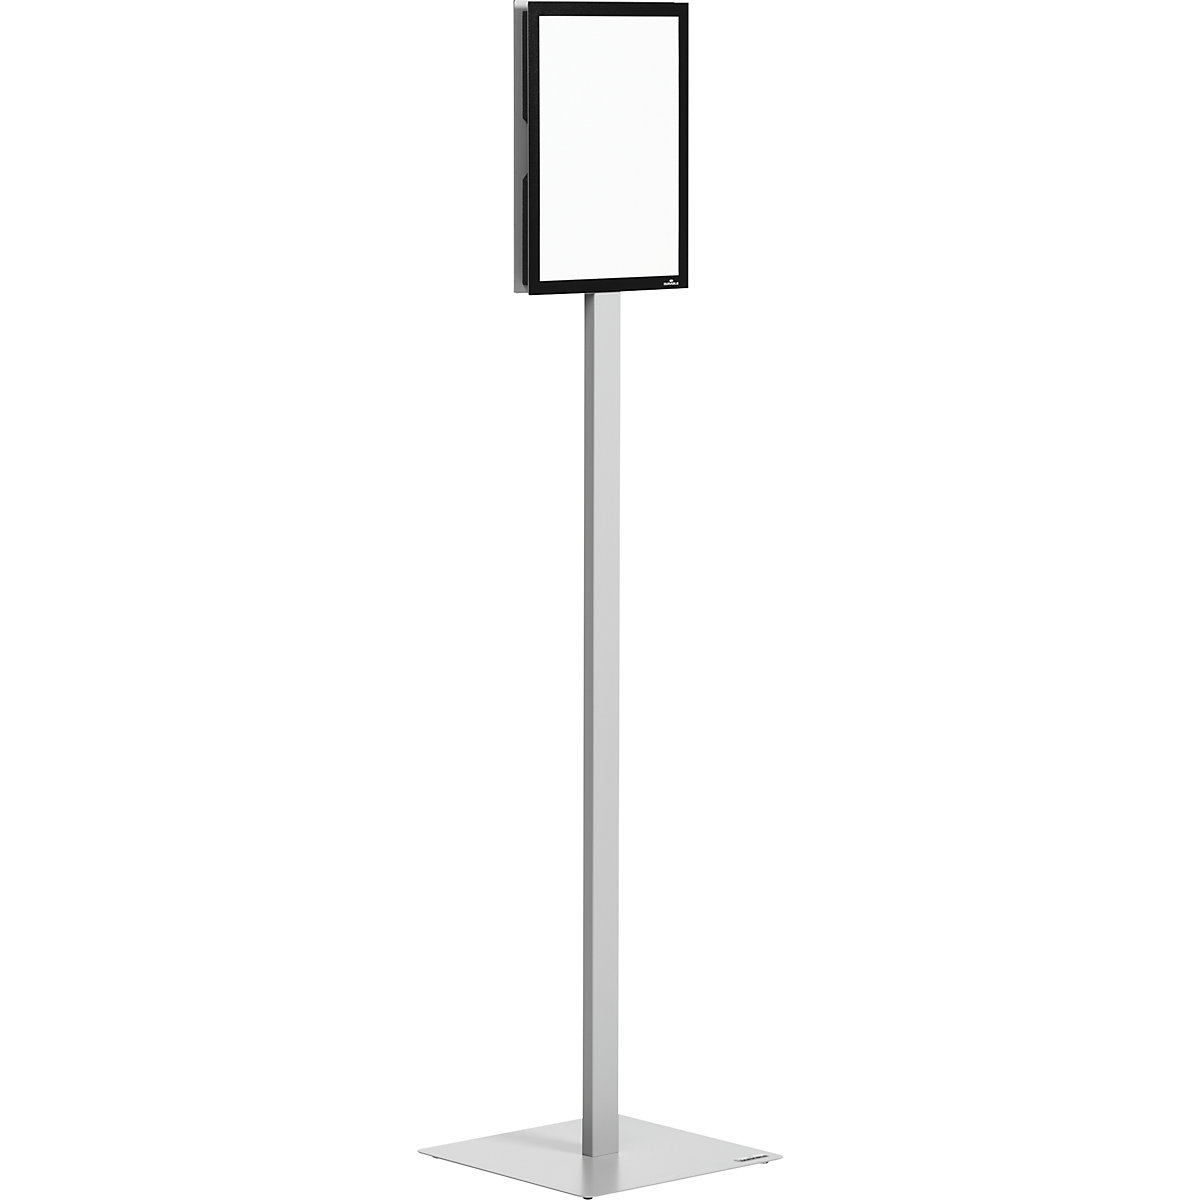 INFO STAND BASIC floor stand - DURABLE